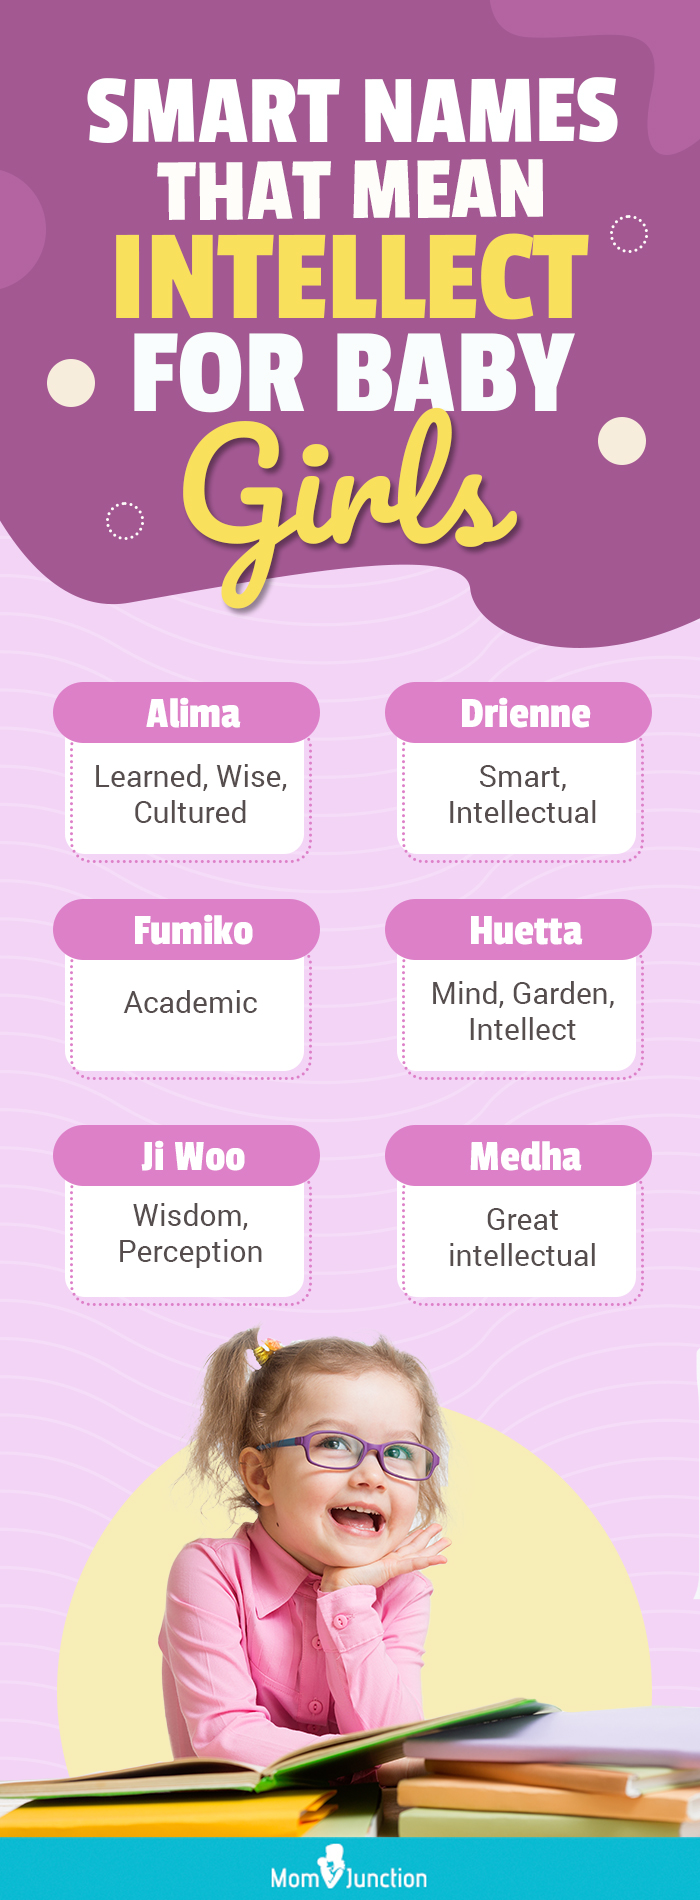 Smart Names That Mean Intellect For Baby Girls (infographic)